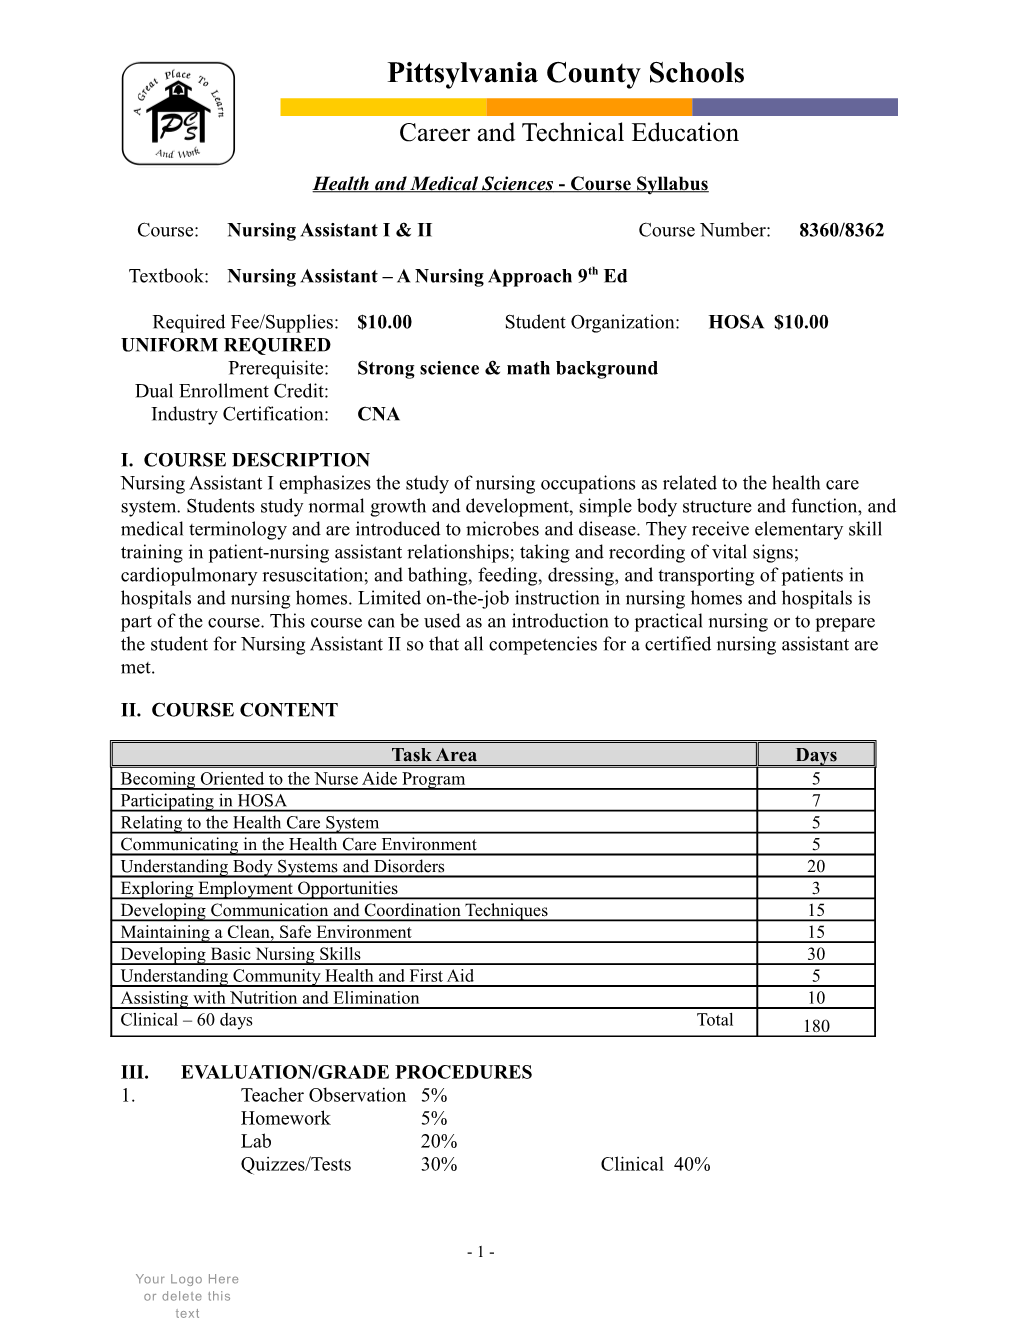 Agricultural Education Course Syllabus s4